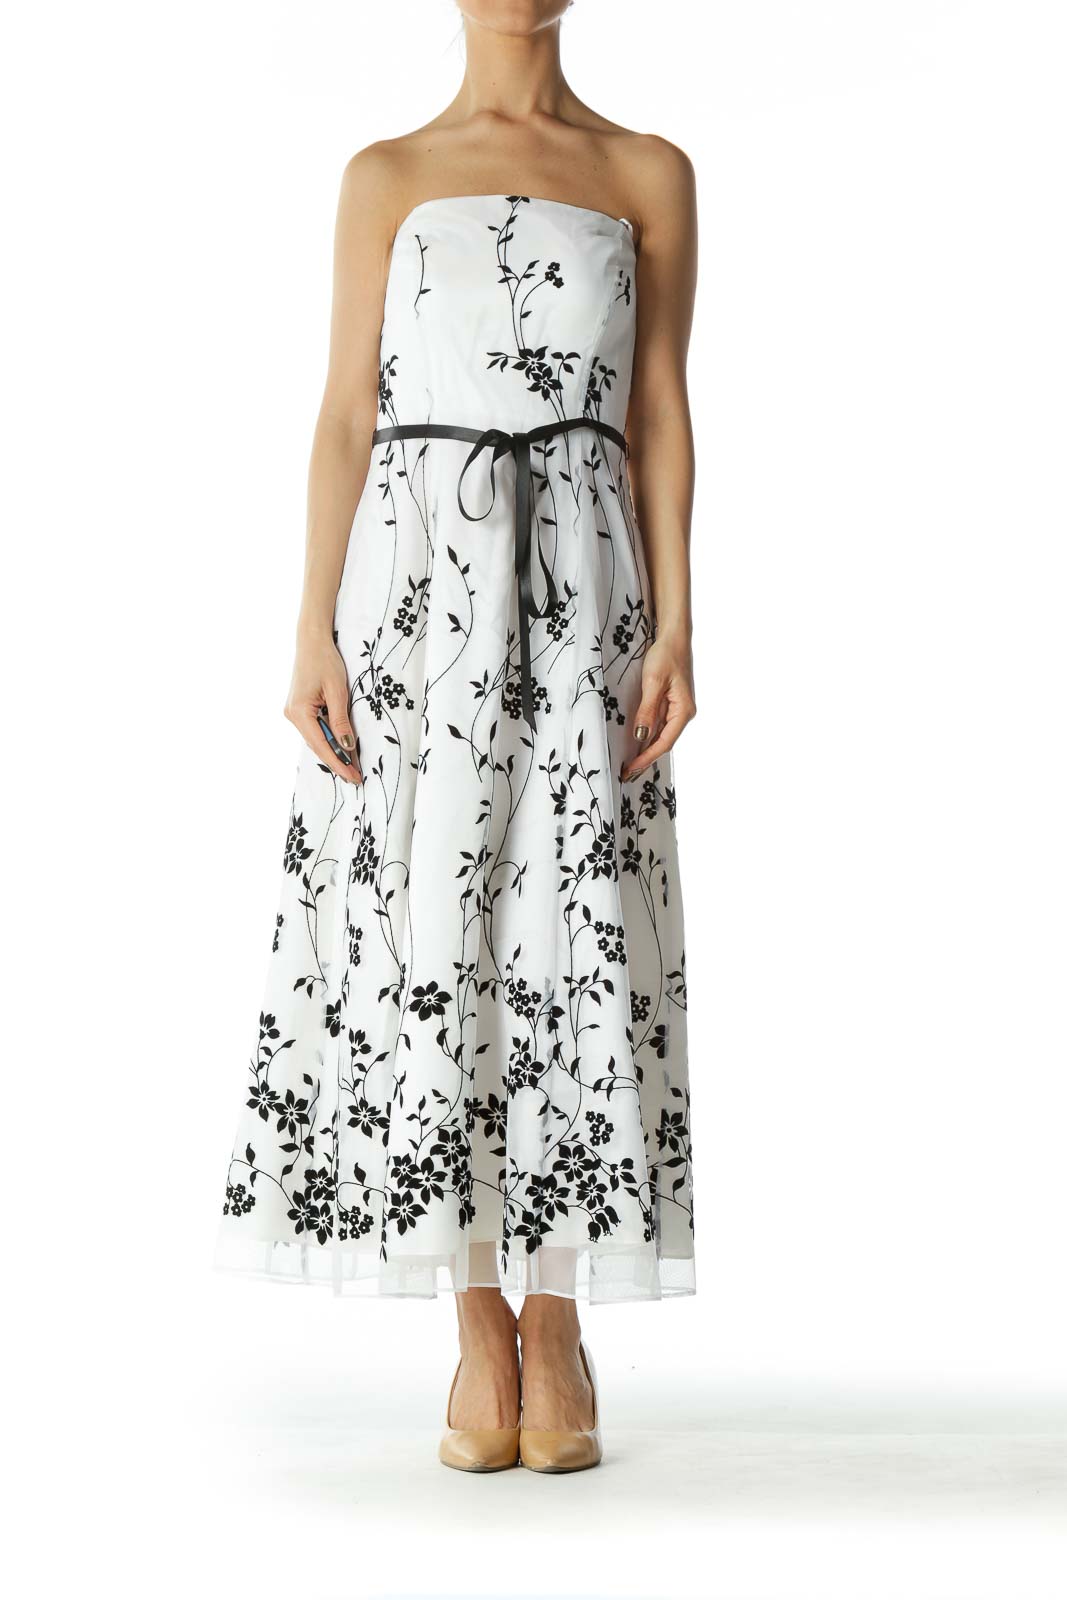 White Dress with Black Floral Print  Front